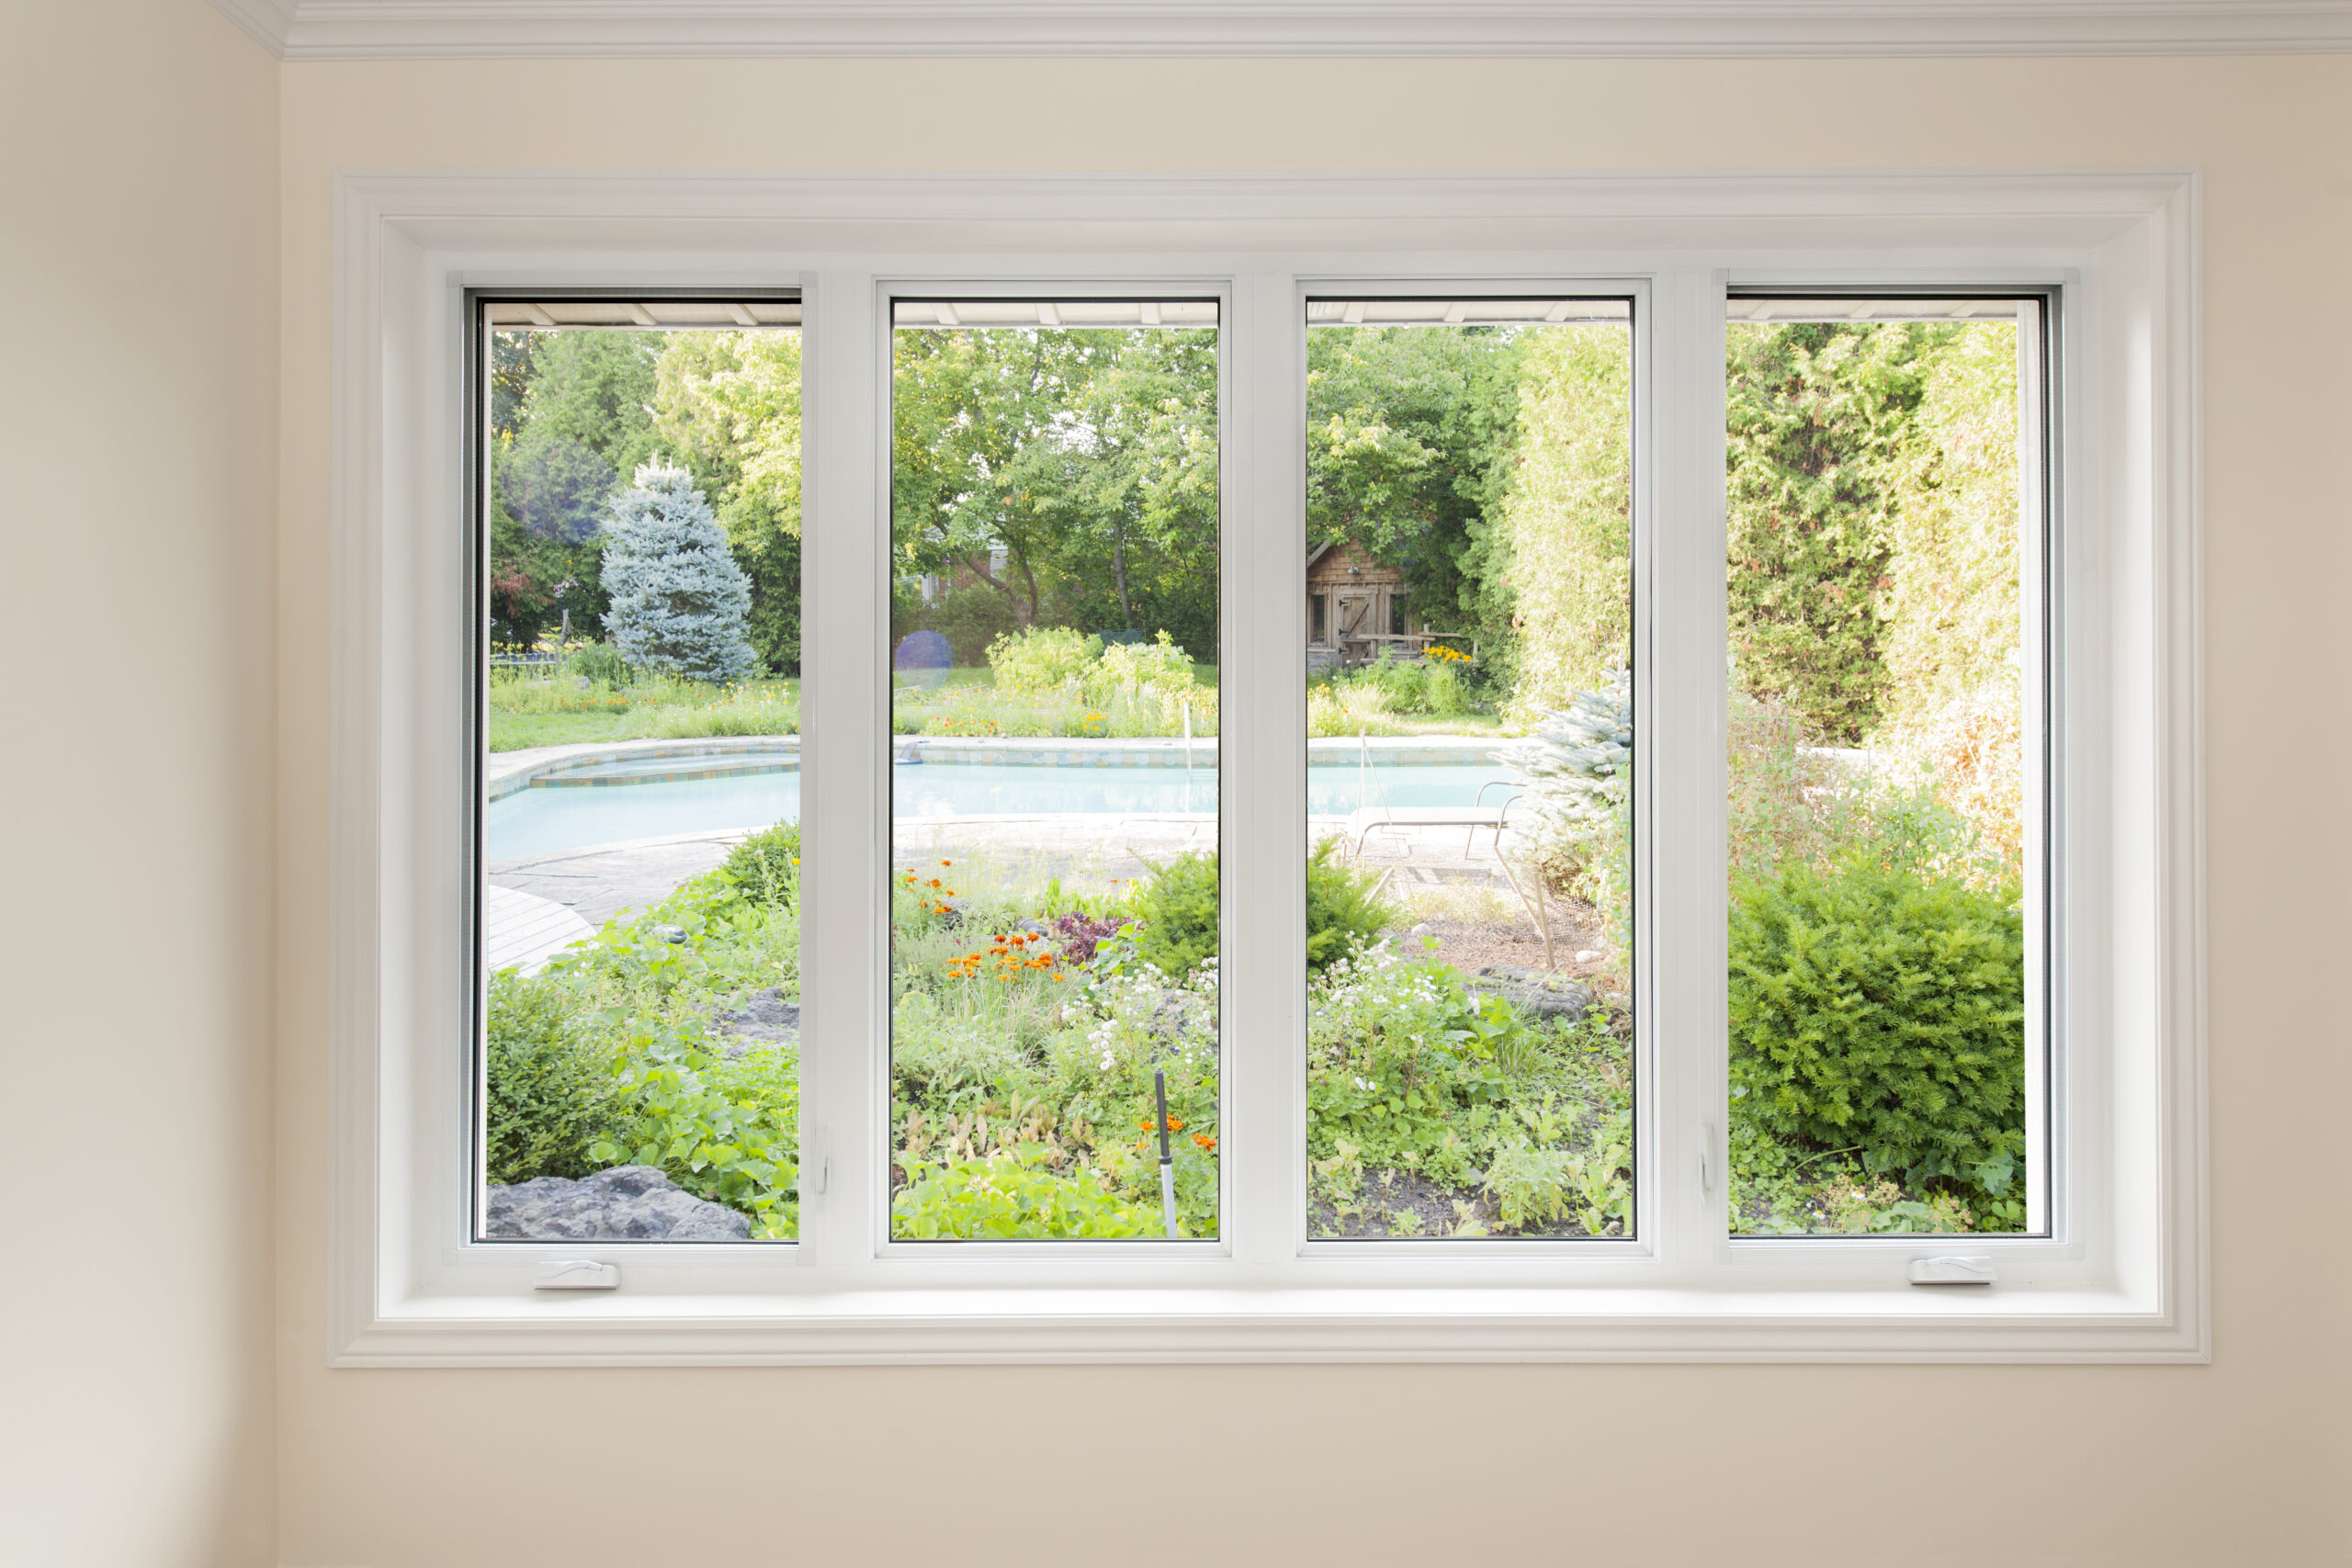 Windows that are good for Saving on Energy costs.